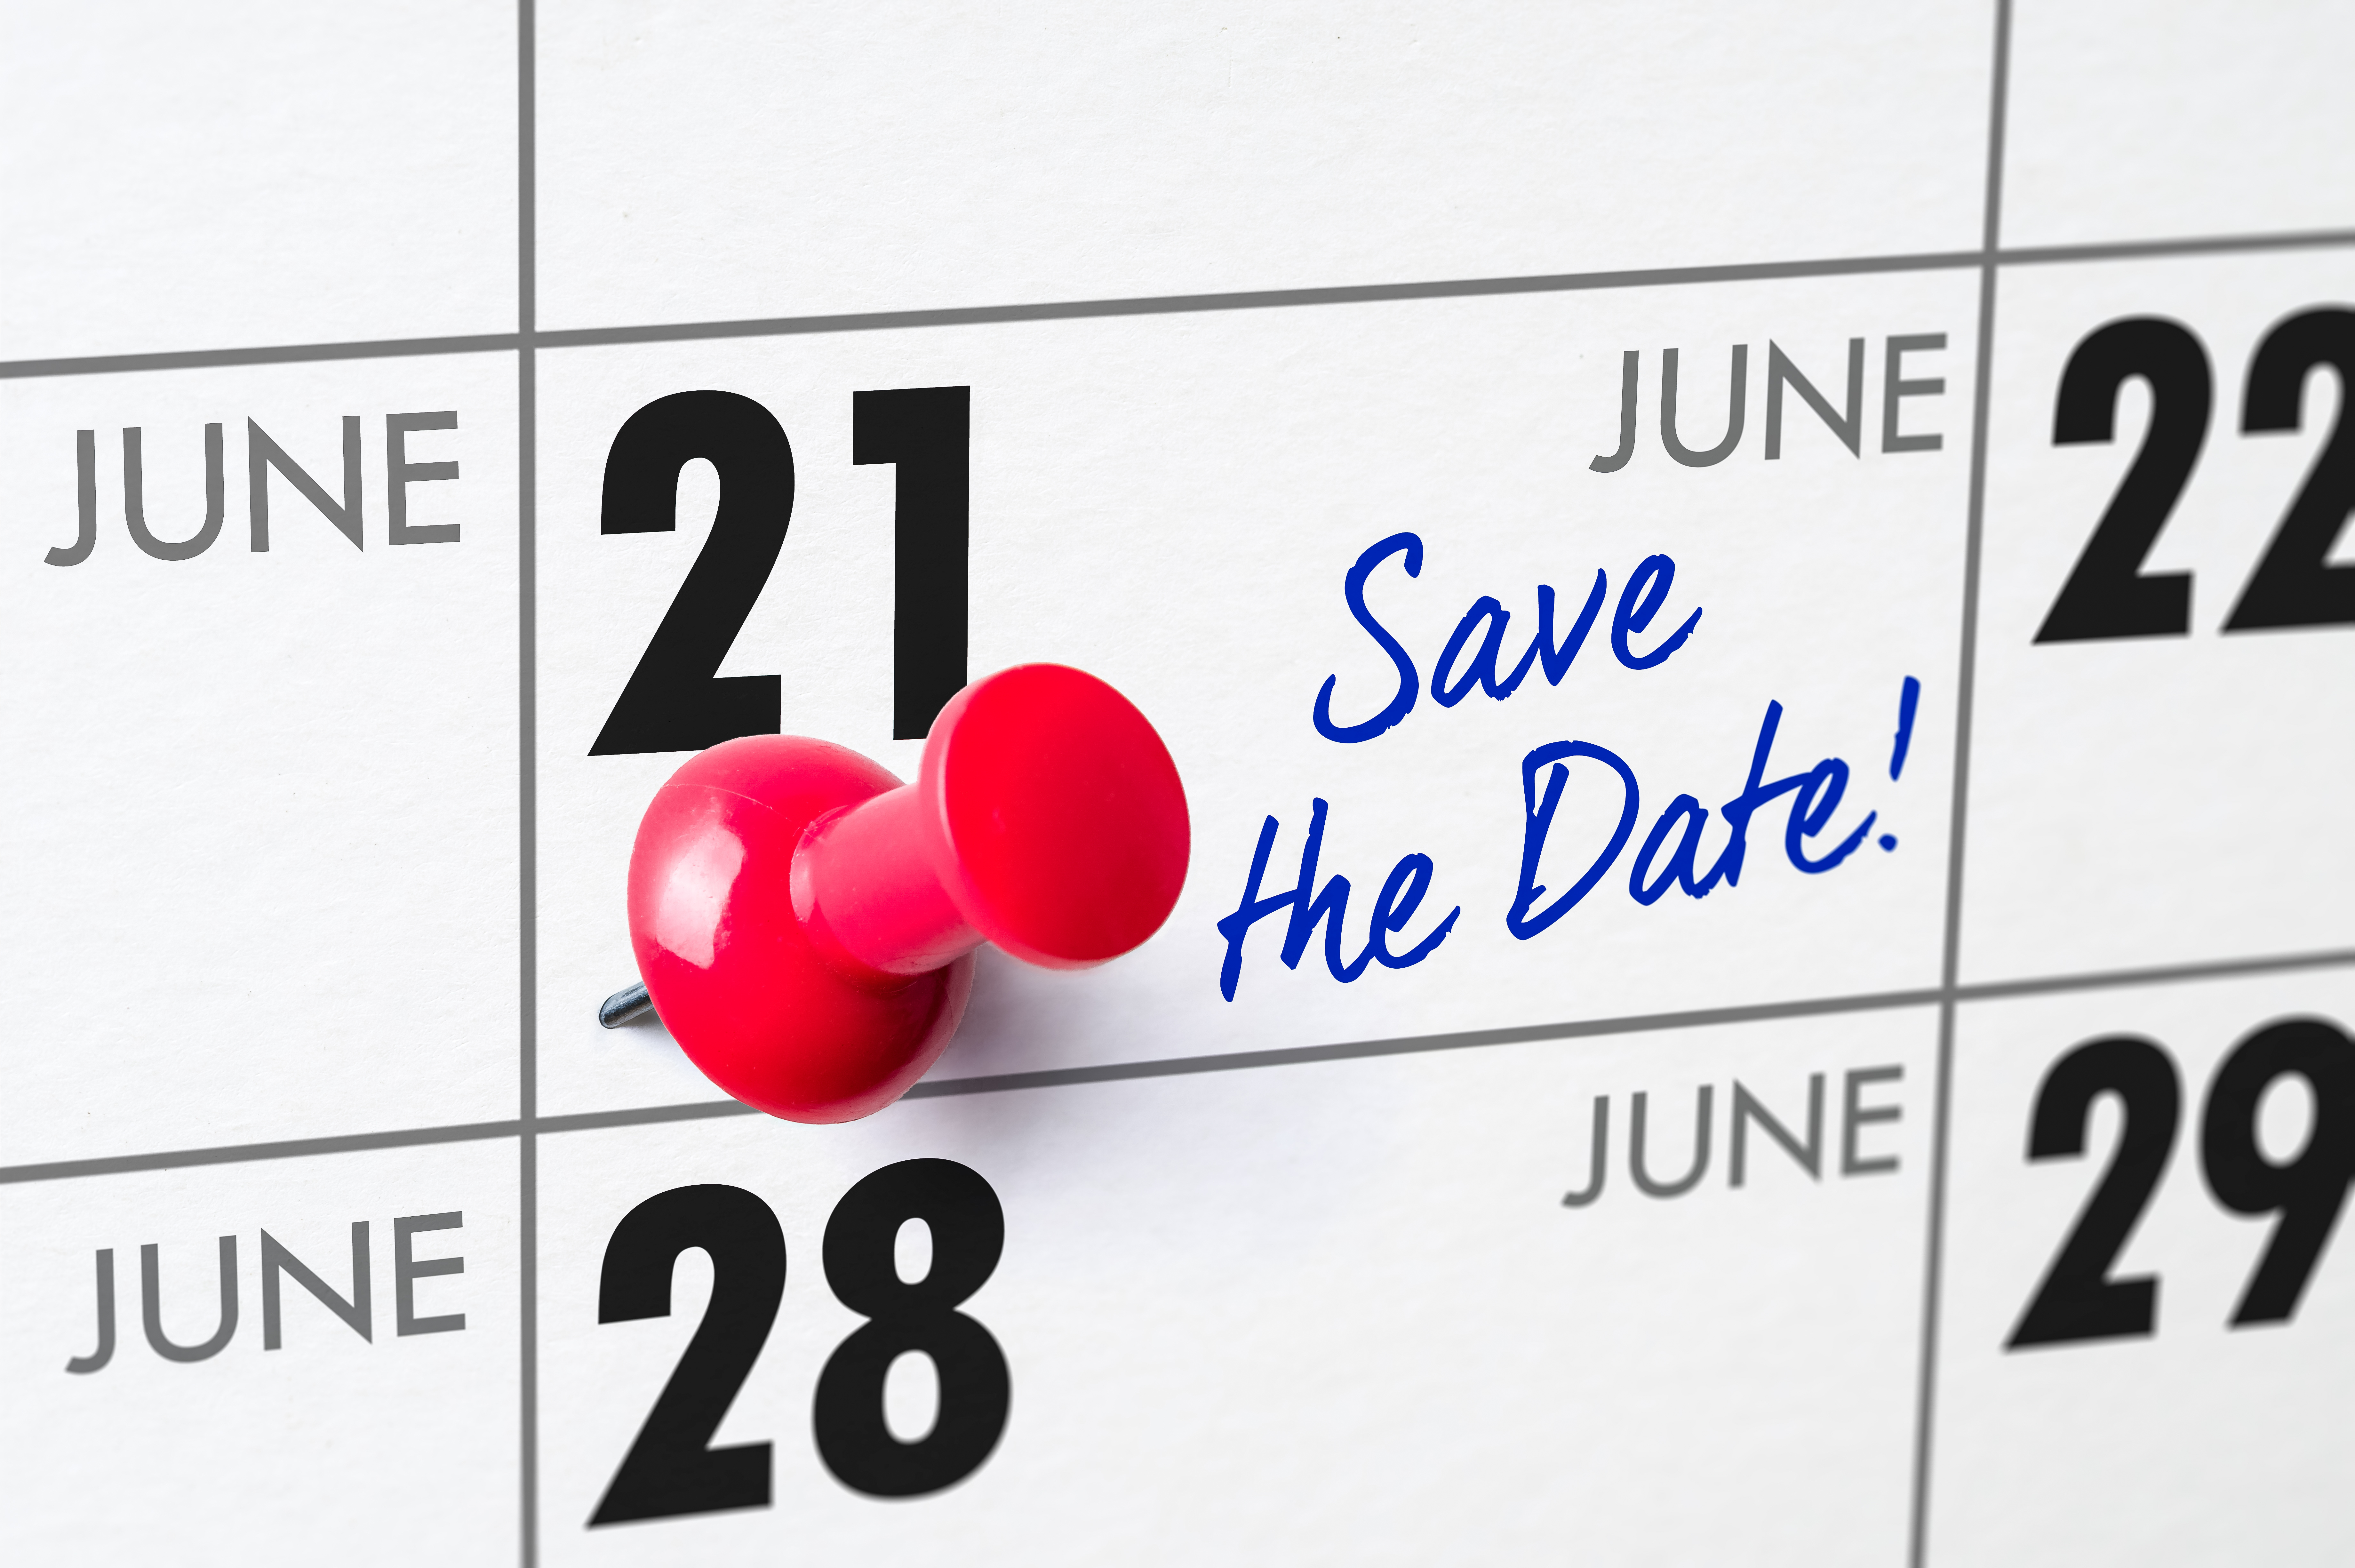 Save the date registration opens on June 21